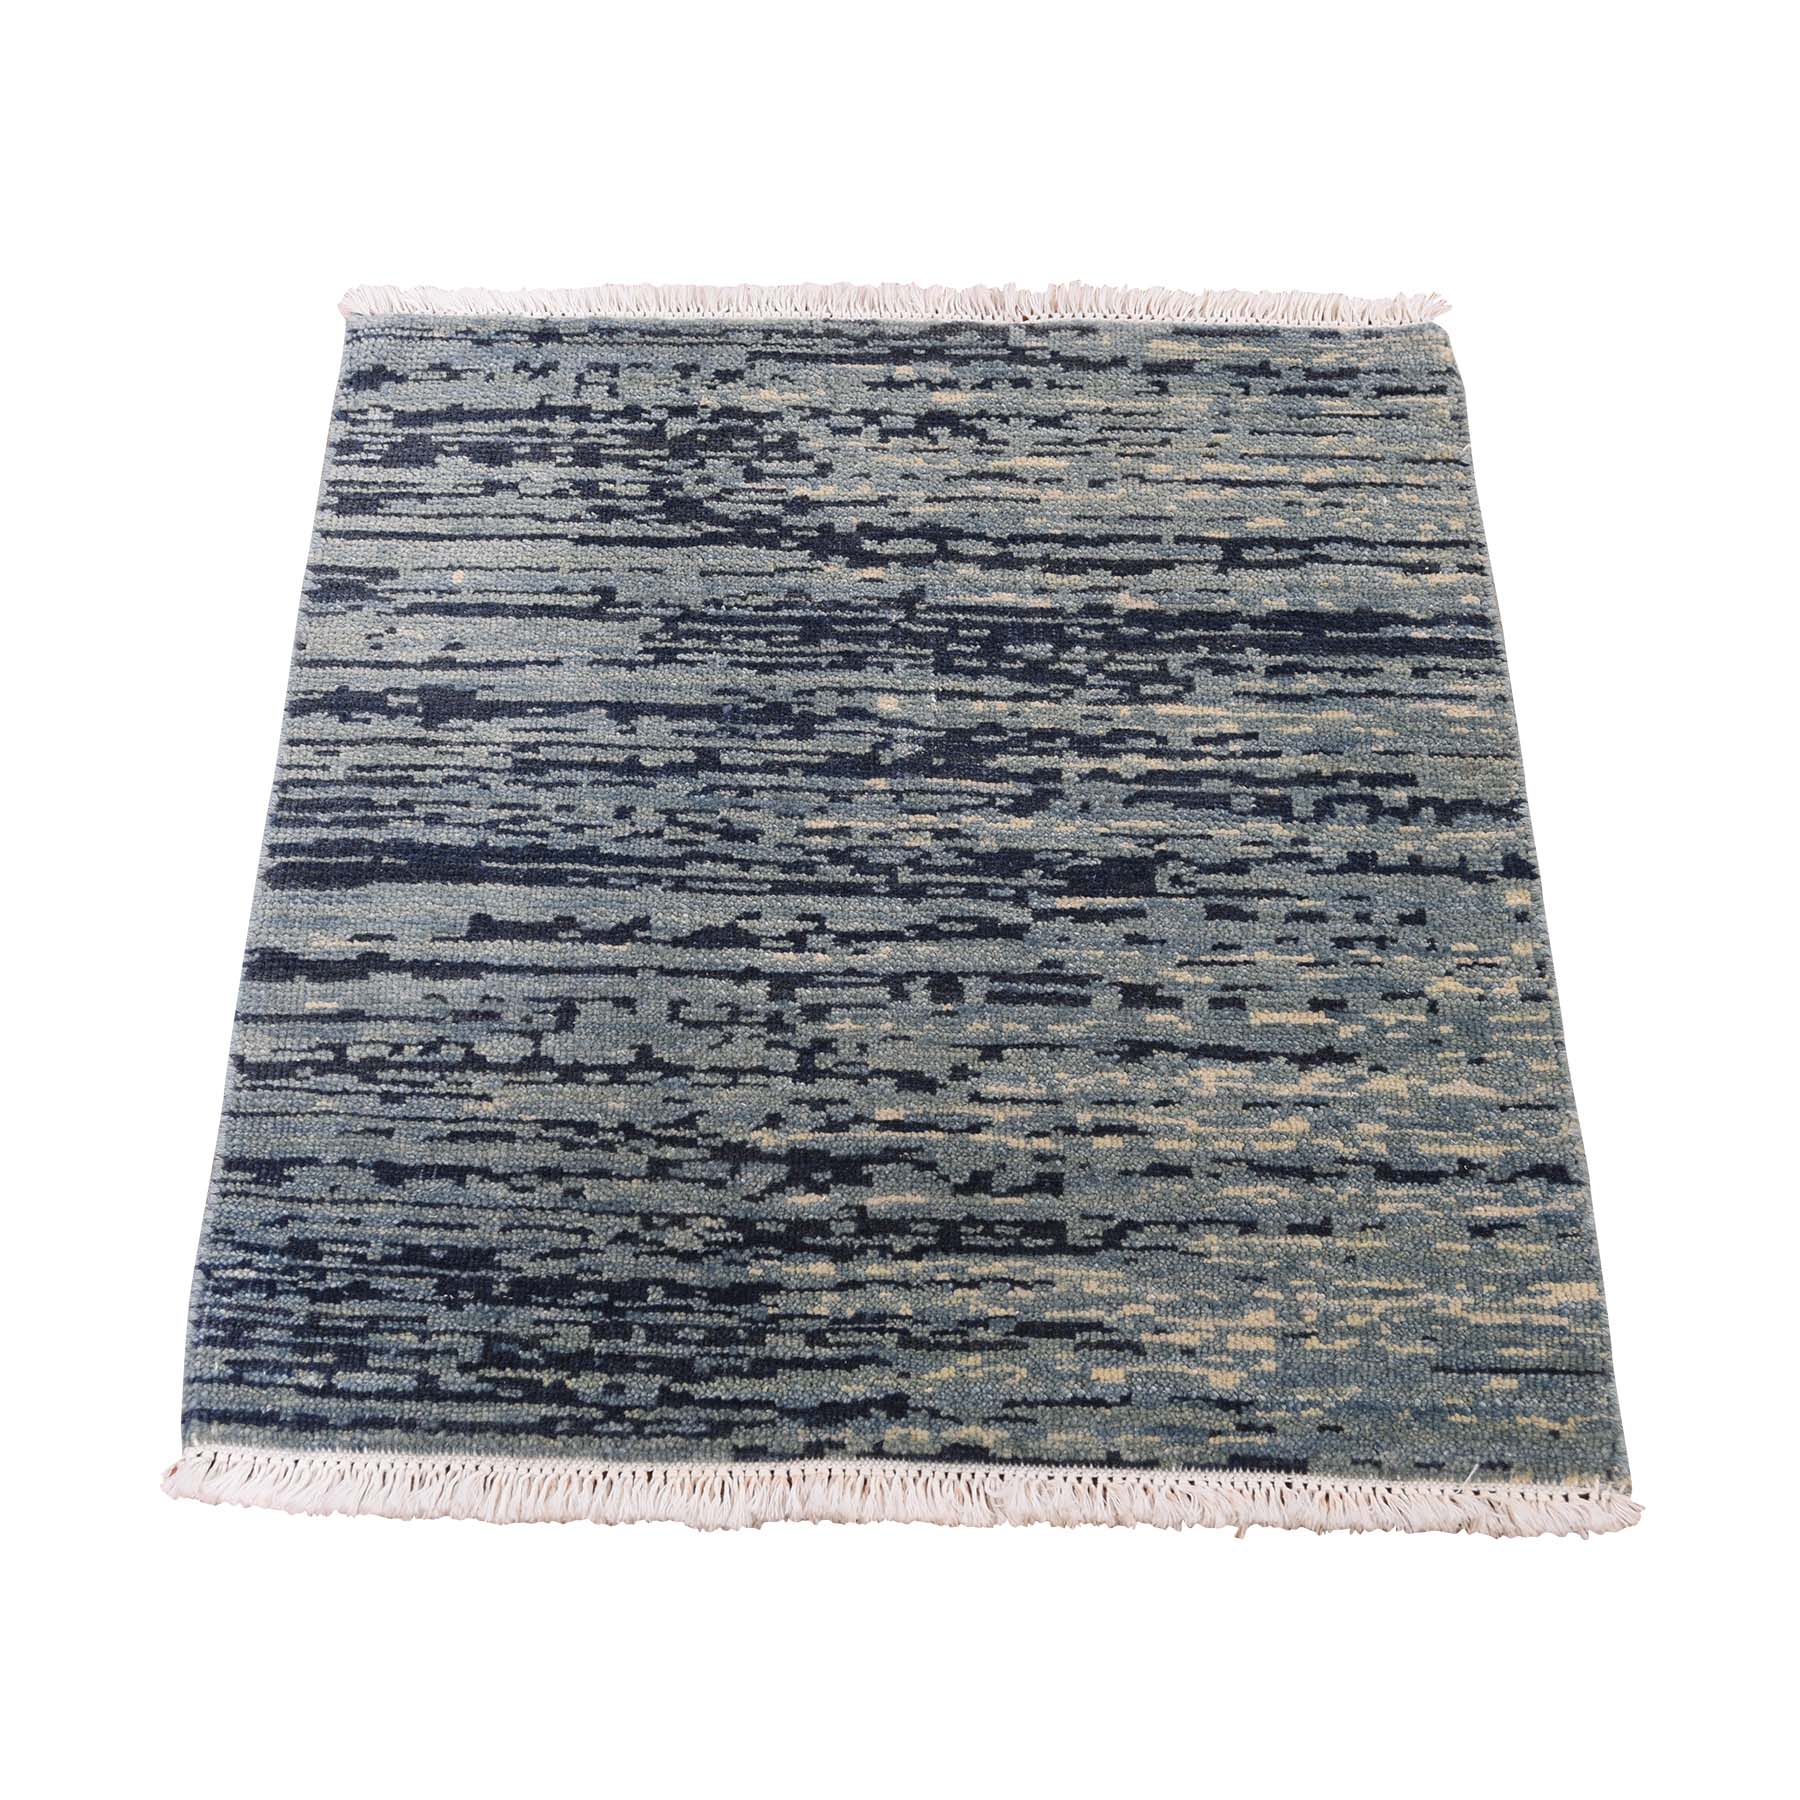 2'x2'2" Pure Wool Abstract Design Hand Woven Oriental Sample Rug 